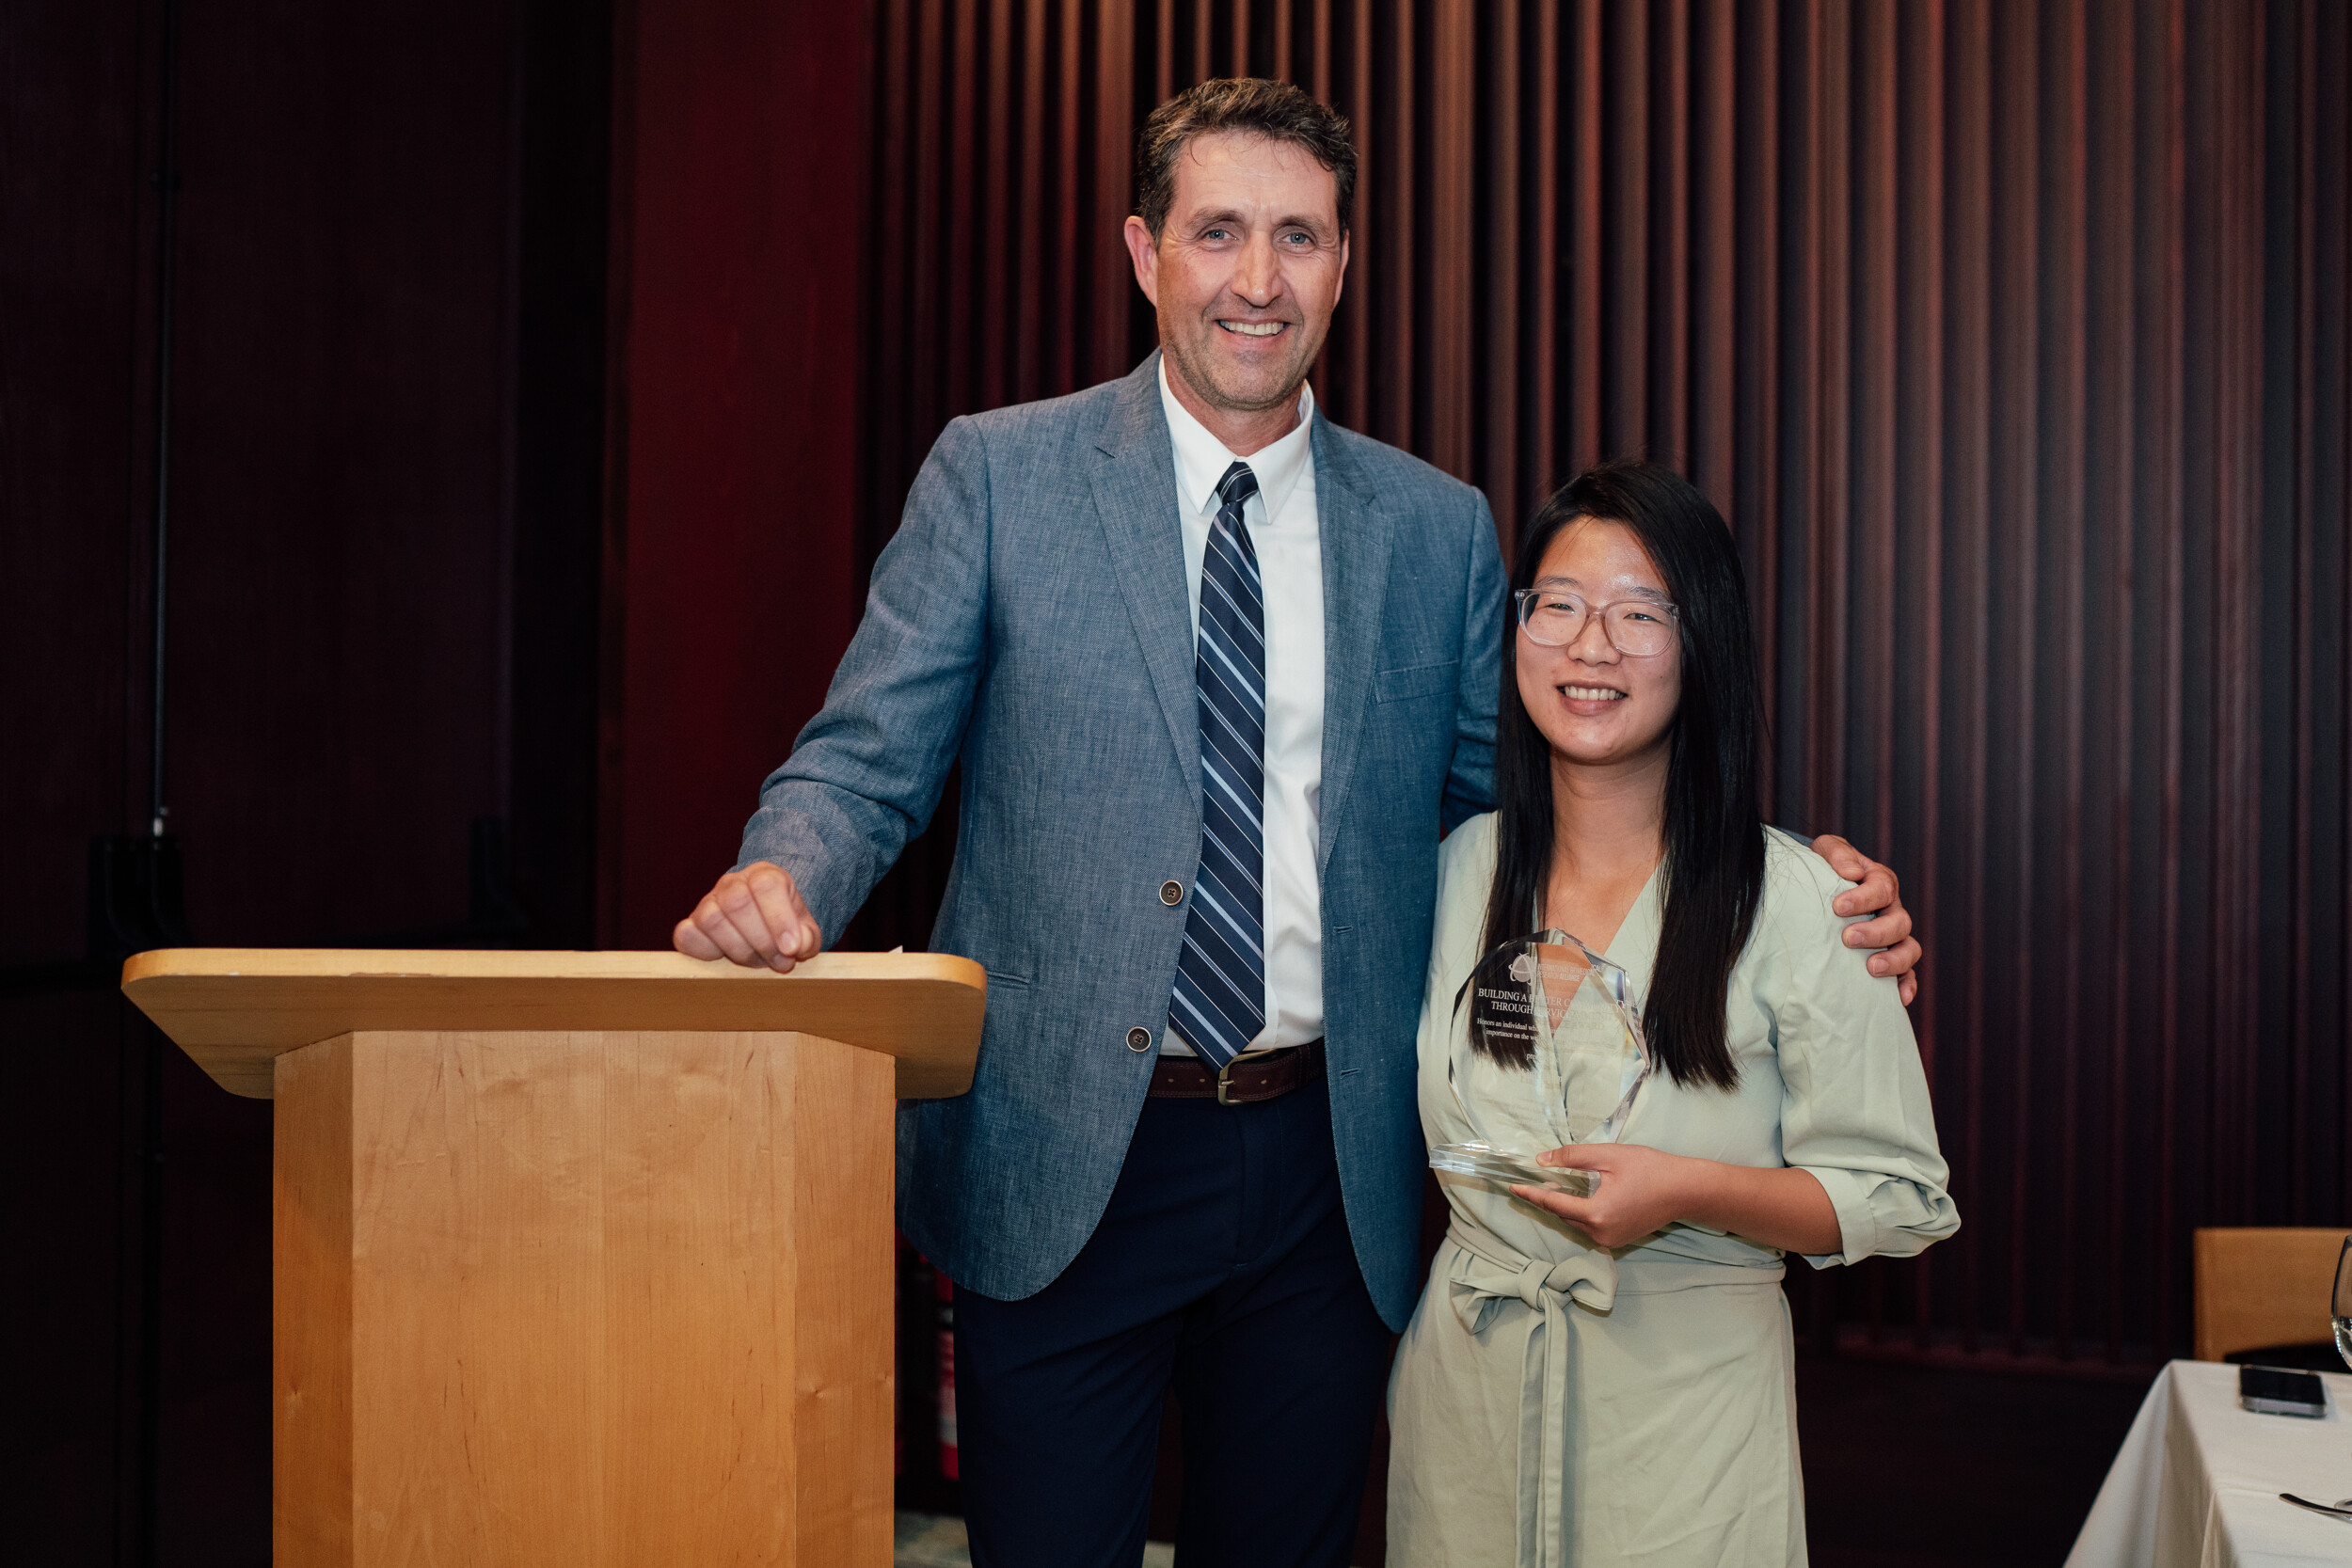 NIH-Oxford MD/PhD Scholar Linh Pham Awarded The 2023 Building a Better Community Through Service Award